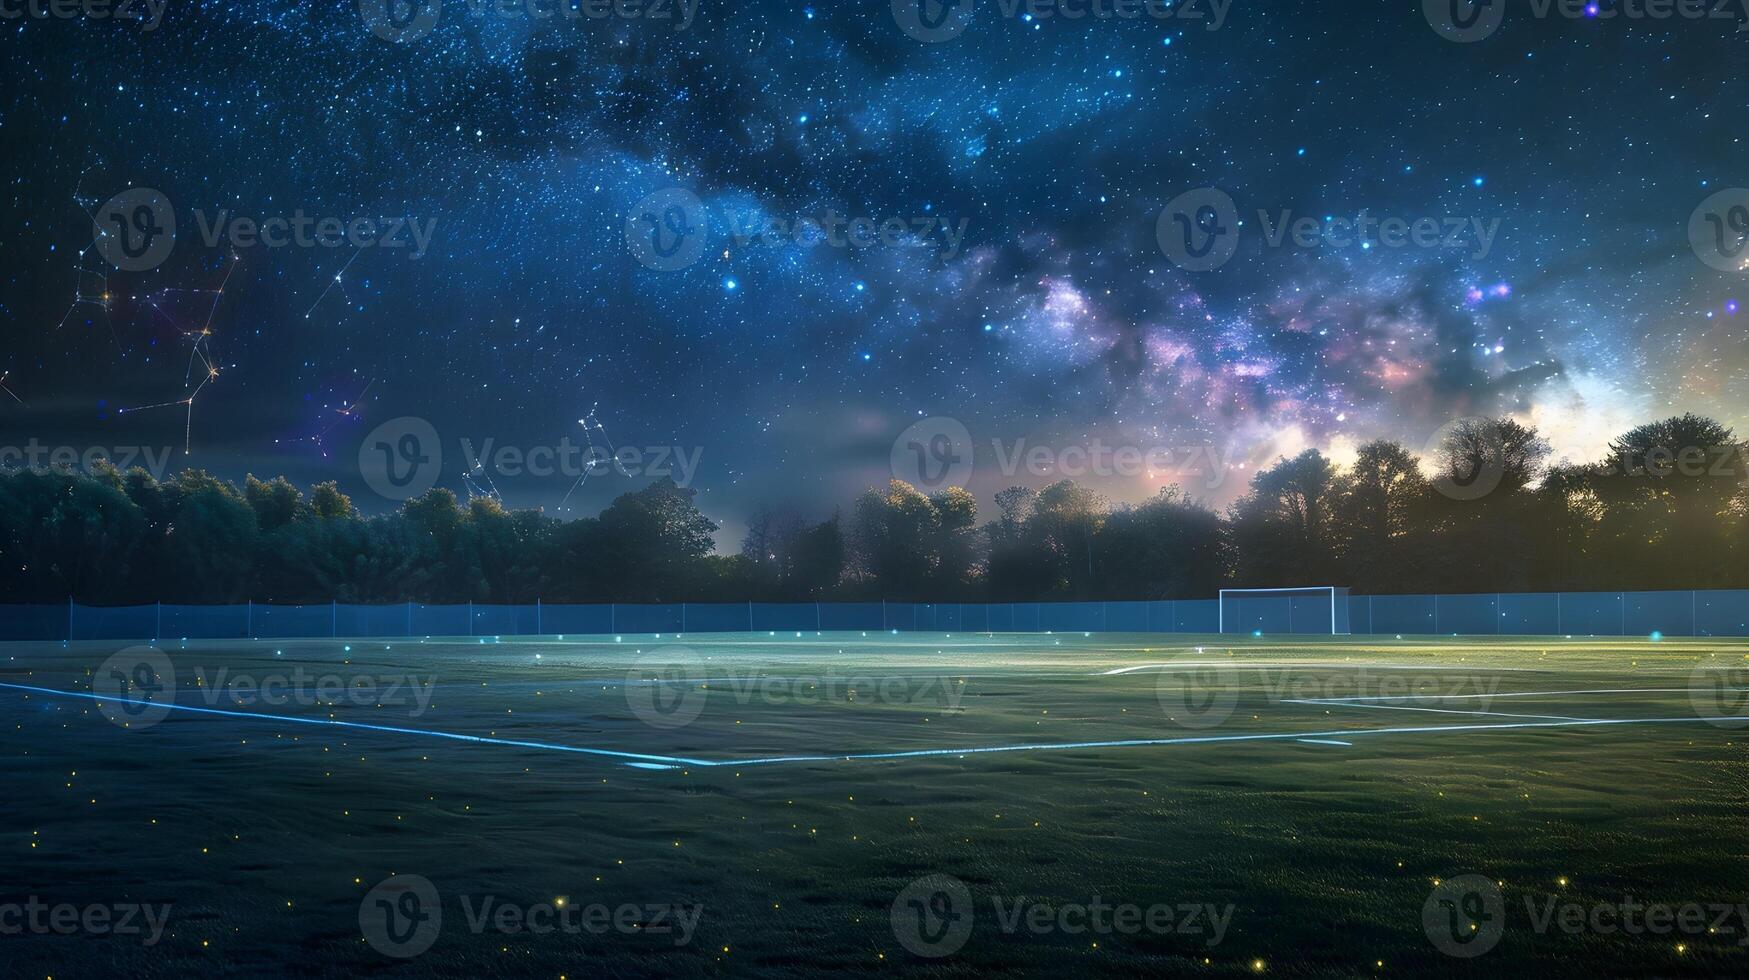 Starry Night Soccer Pitch A Tranquil Constellation-Lit Field Under the Cosmic Vault photo